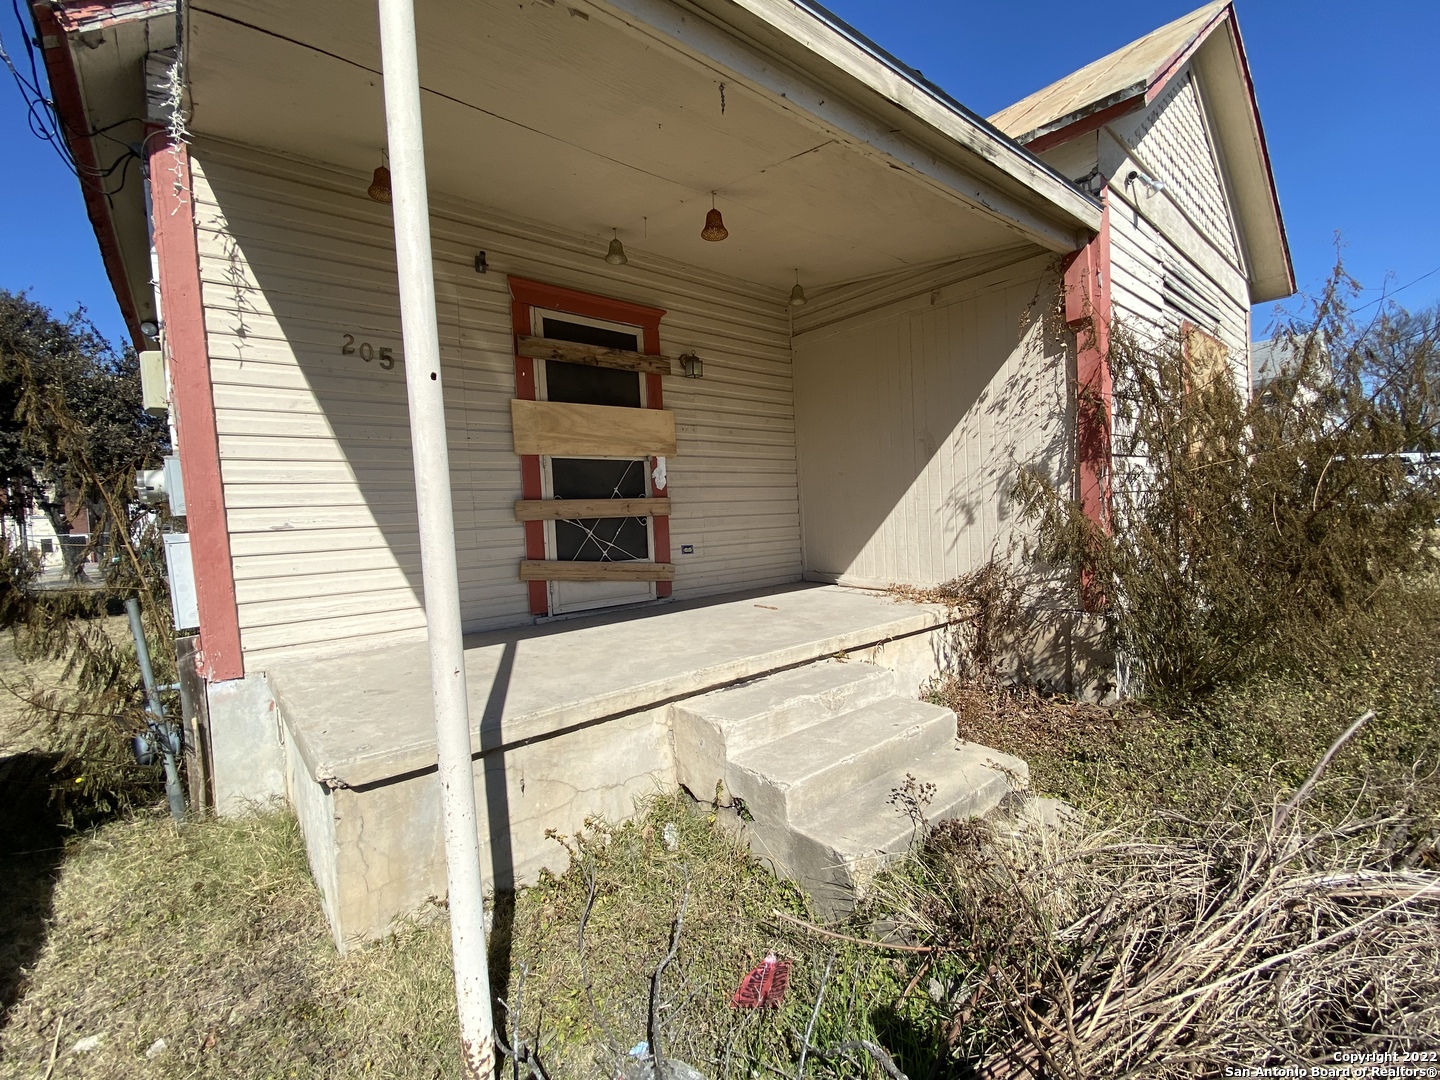 Great Investment Property! This 2 Bed 1 Bath is located near the Alamodome, and minutes away from Sunset Station, Pearl and Riverwalk. Put some charm into this home and it can make a great starter home or investment property.